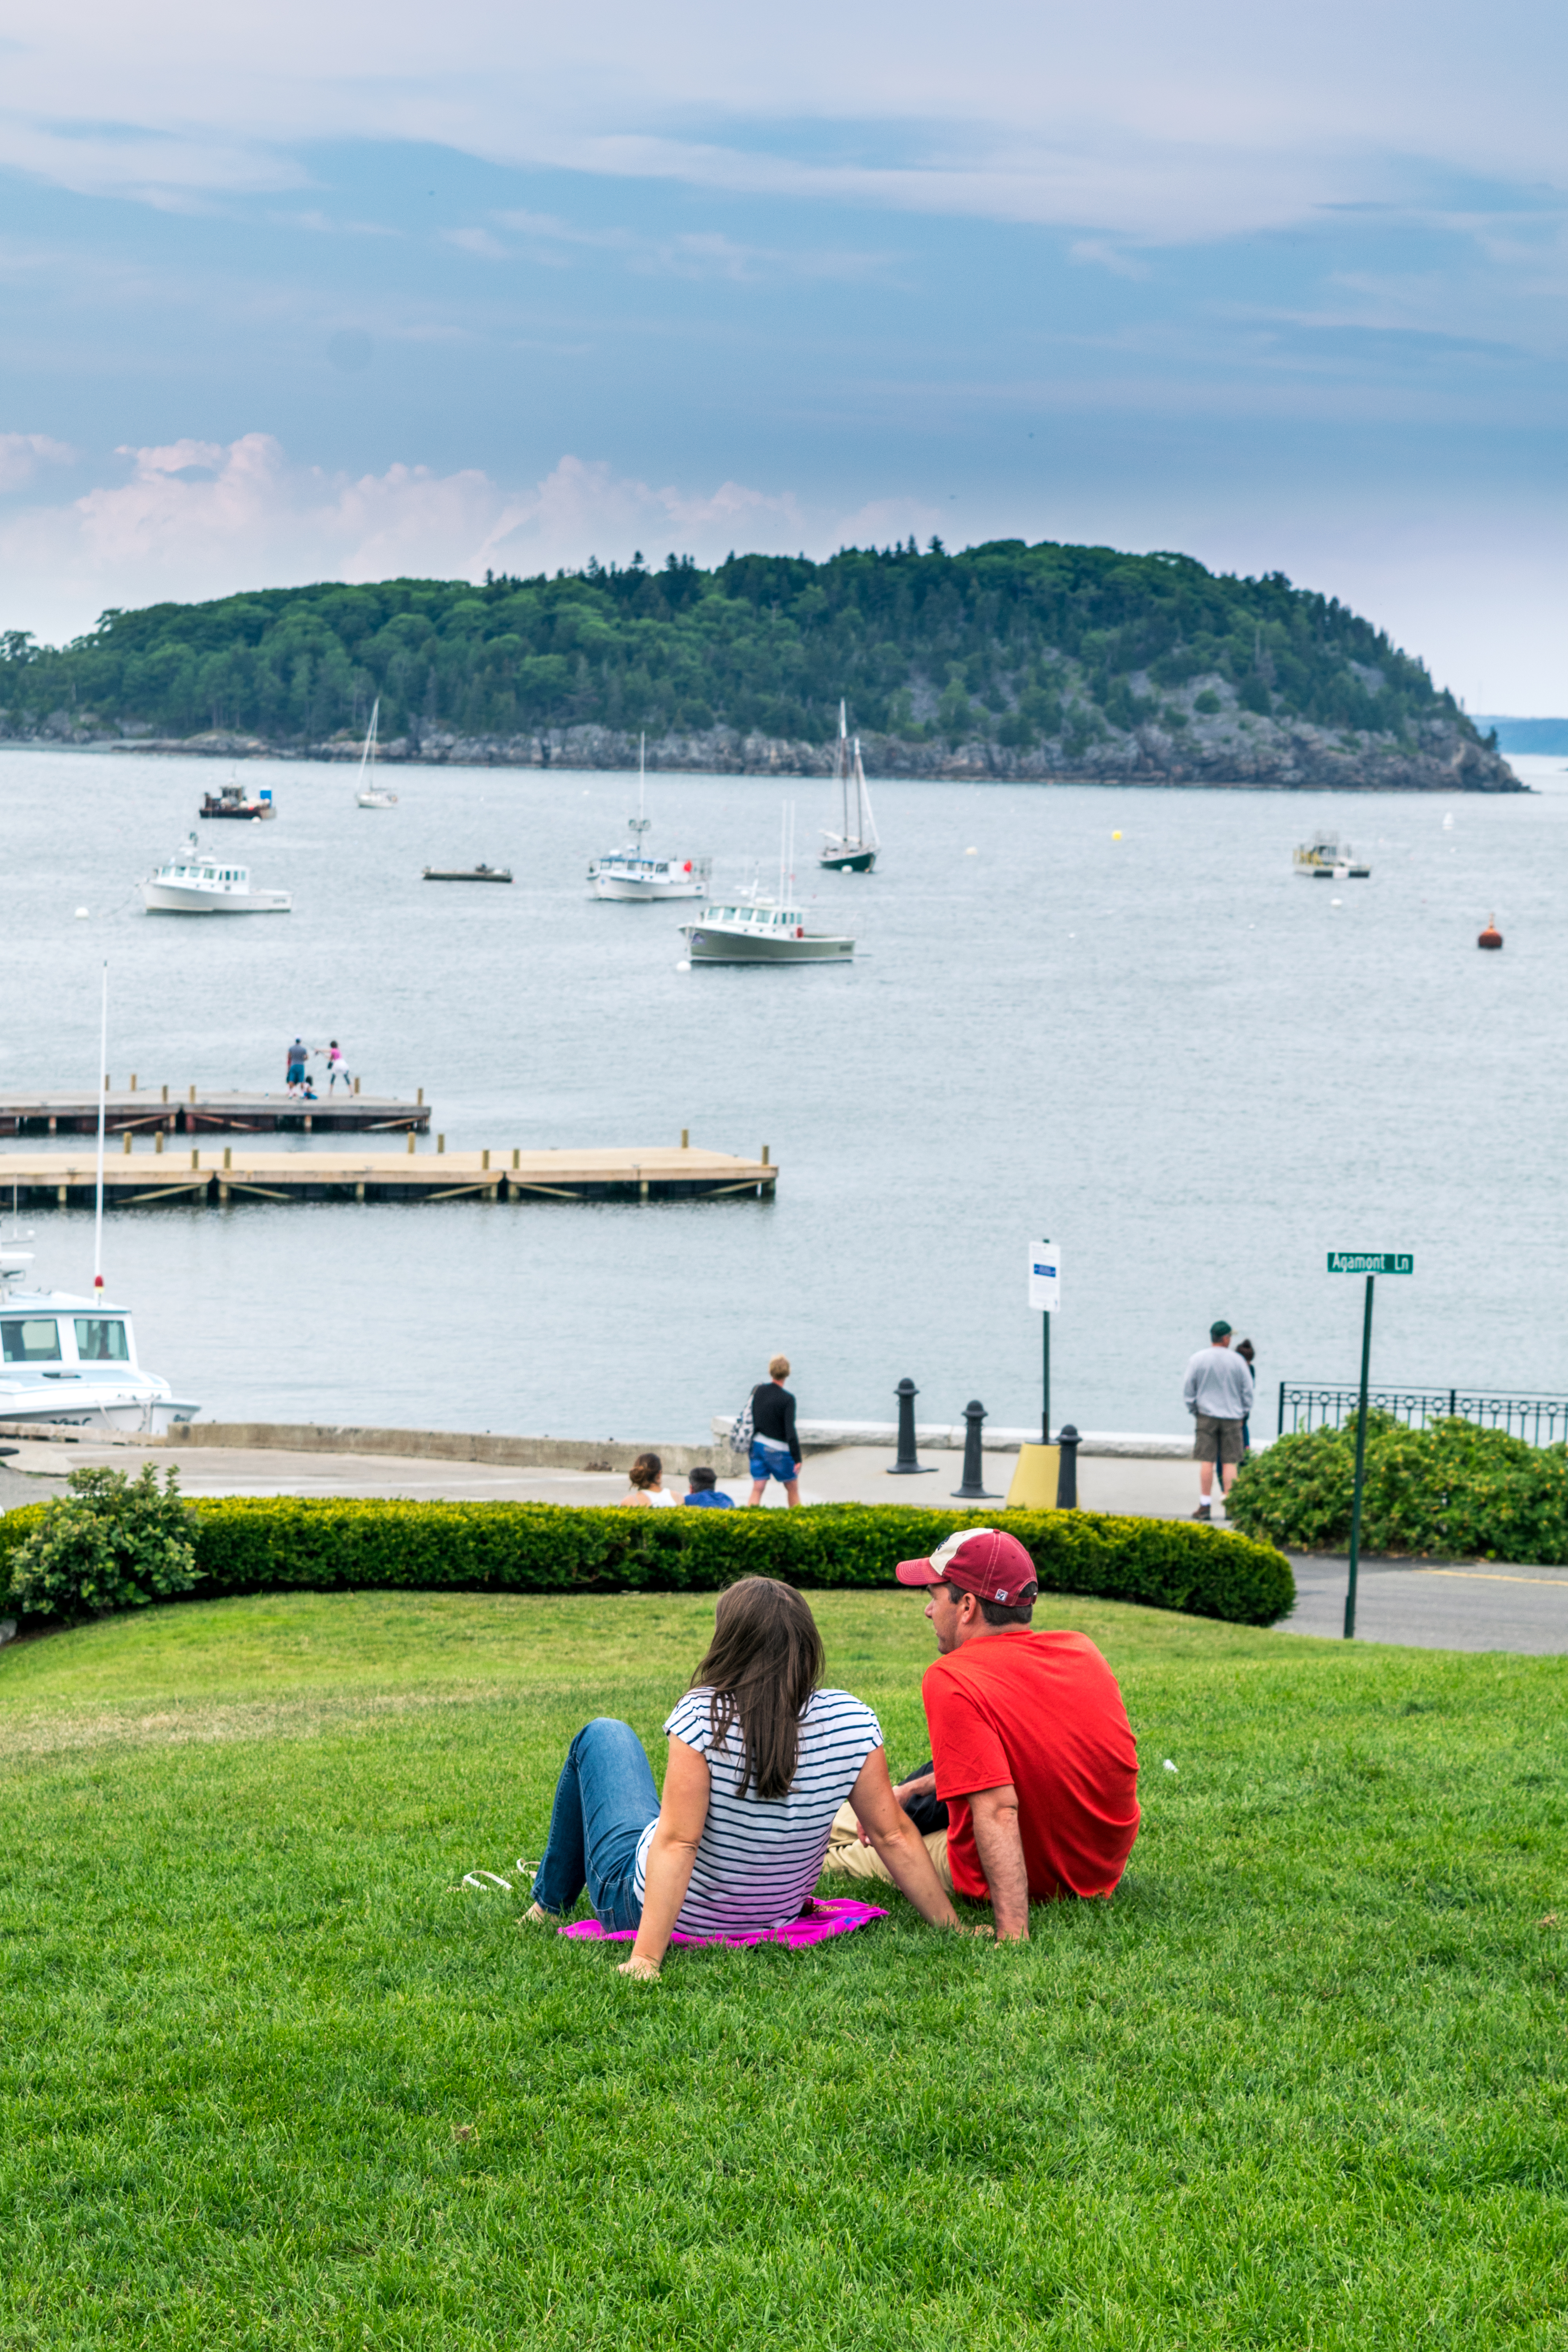 Fifteen Things to Do in Bar Harbor for $15 or Less